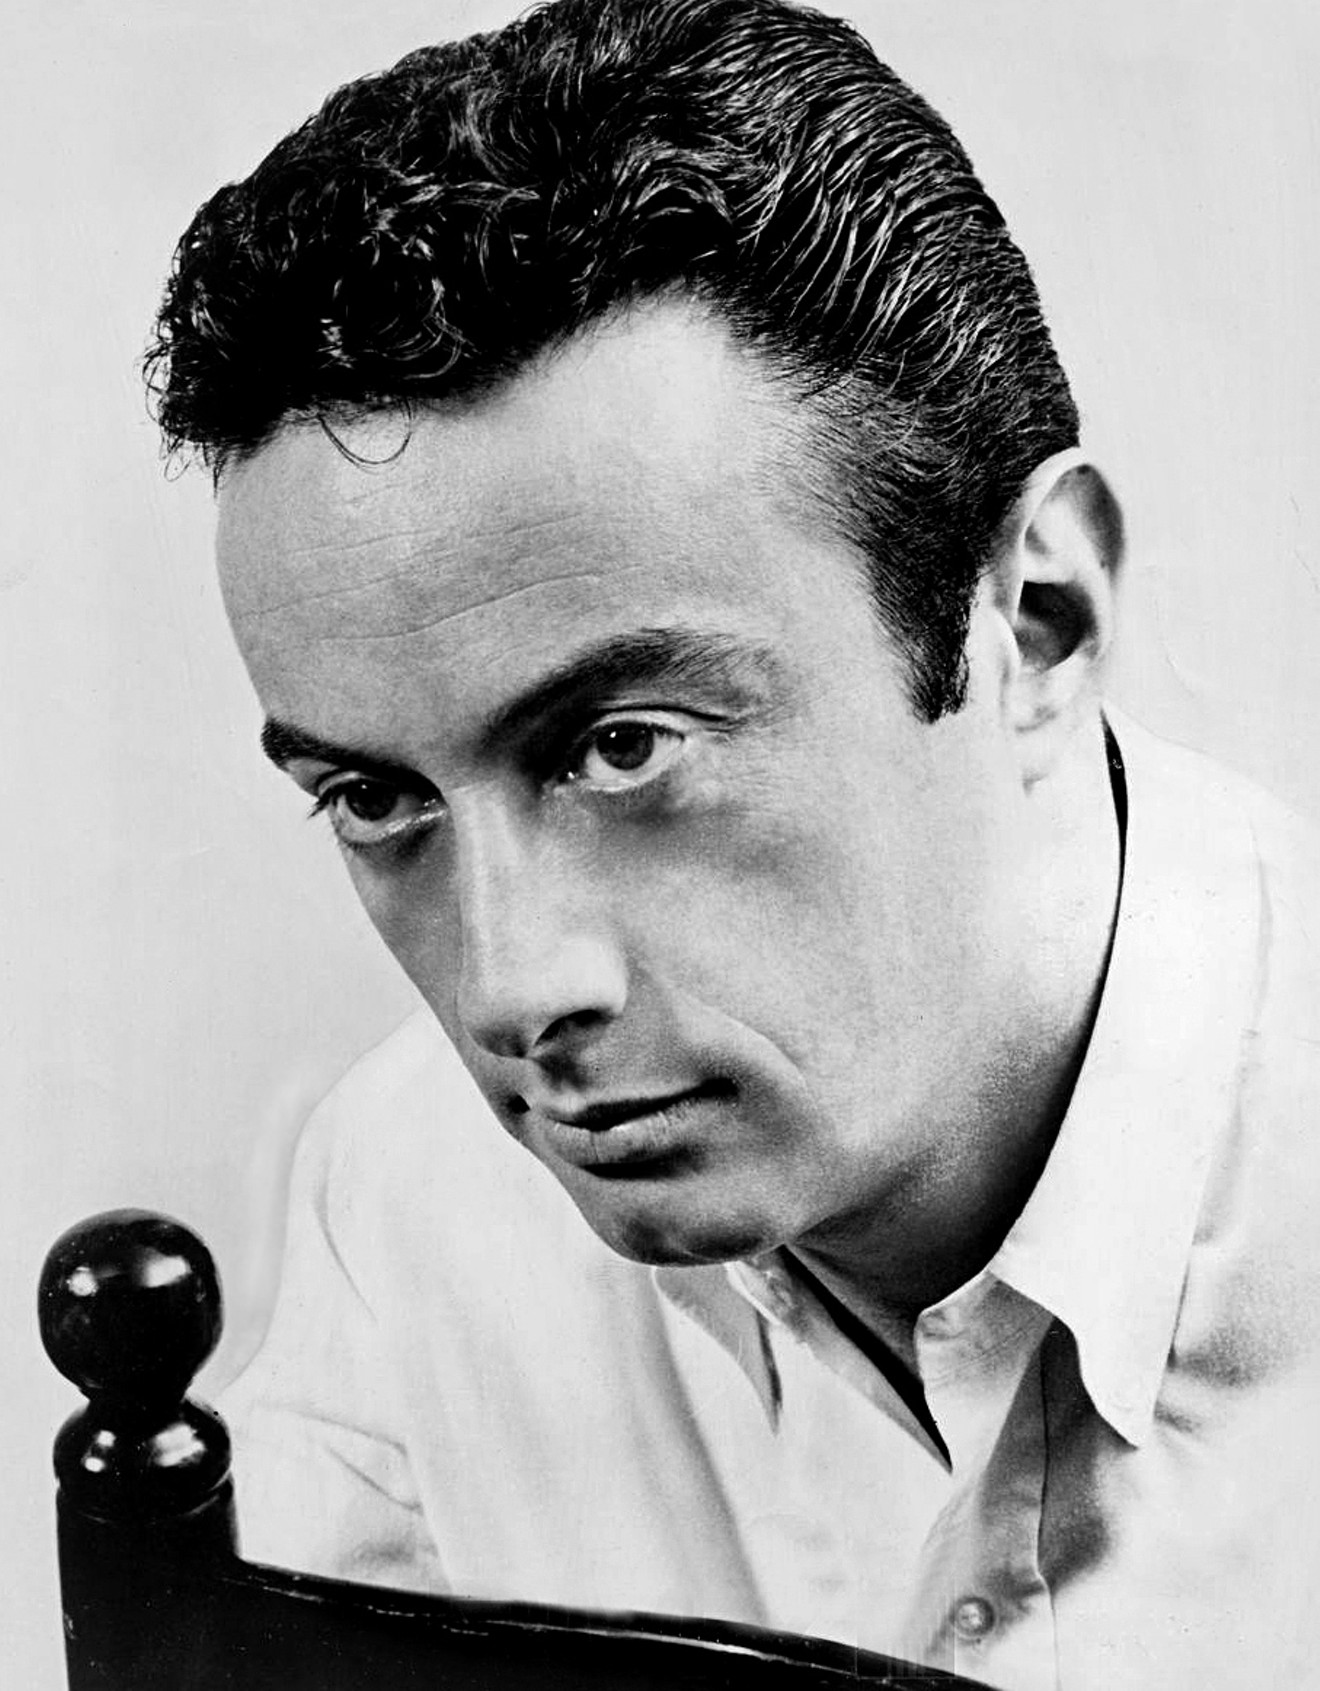 Comedian Lenny Bruce was frequently thrown in jail for using words like "cocksucker" and "schmuck" — kiddie stuff for comedians today.